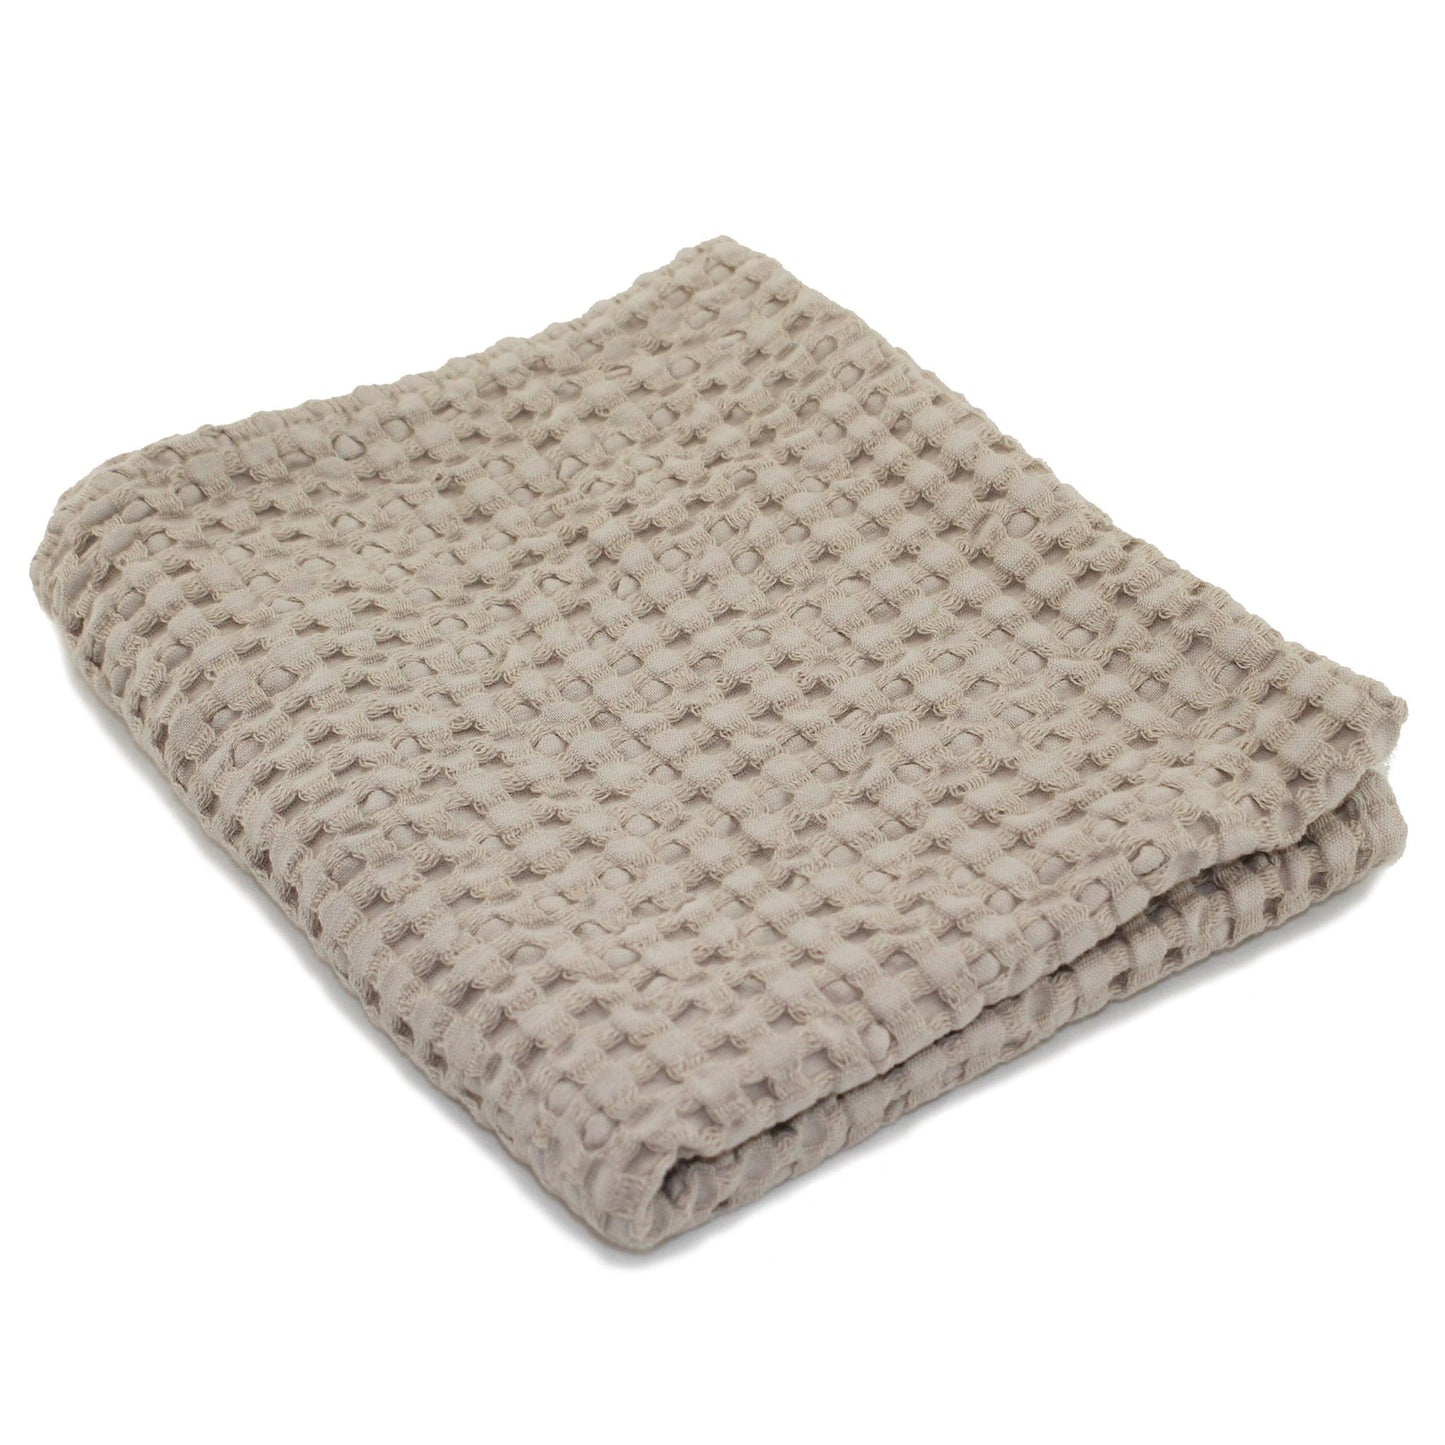 Pousada Most Absorbent Egyptian Cotton Towels Giza 70 - 770 Linen - |VESIMI Design| Luxury and Rustic bathrooms online